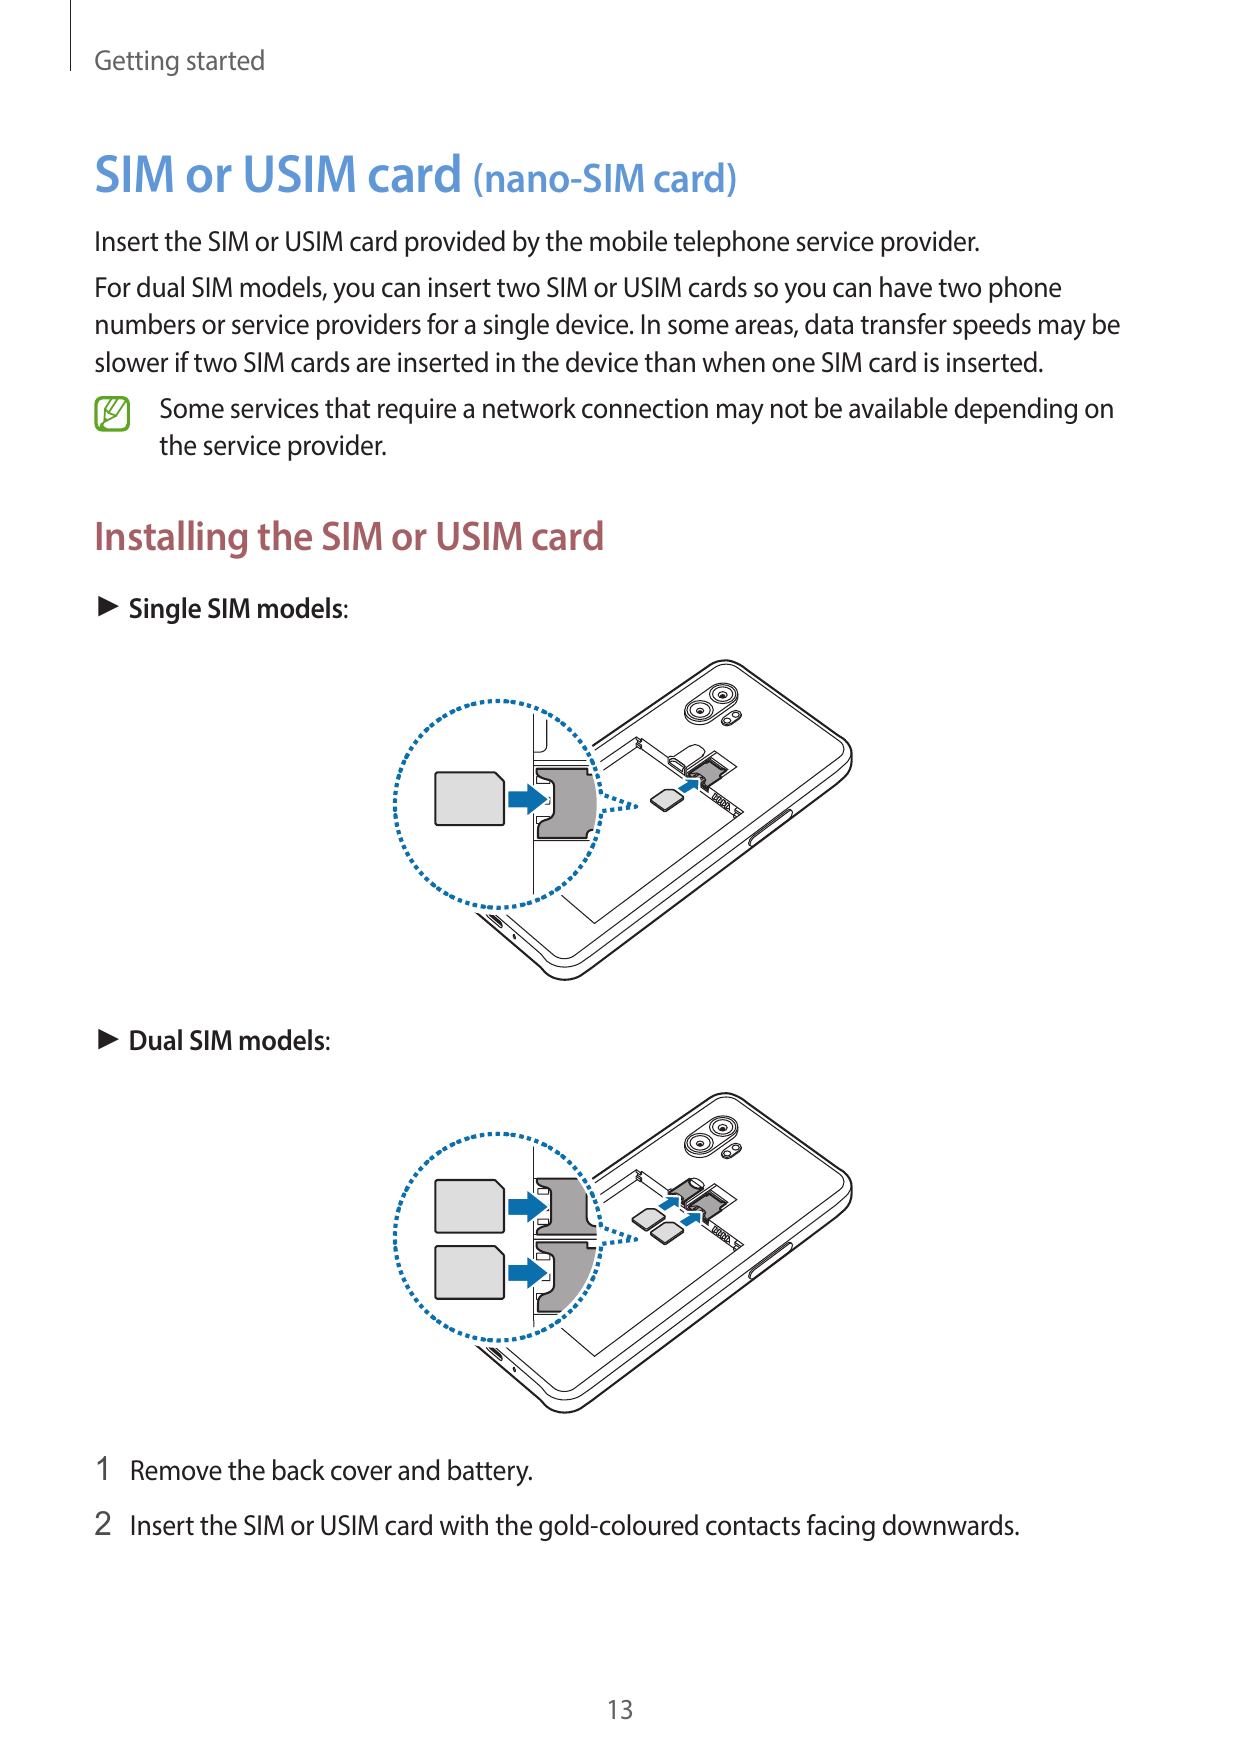 Getting startedSIM or USIM card (nano-SIM card)Insert the SIM or USIM card provided by the mobile telephone service provider.For